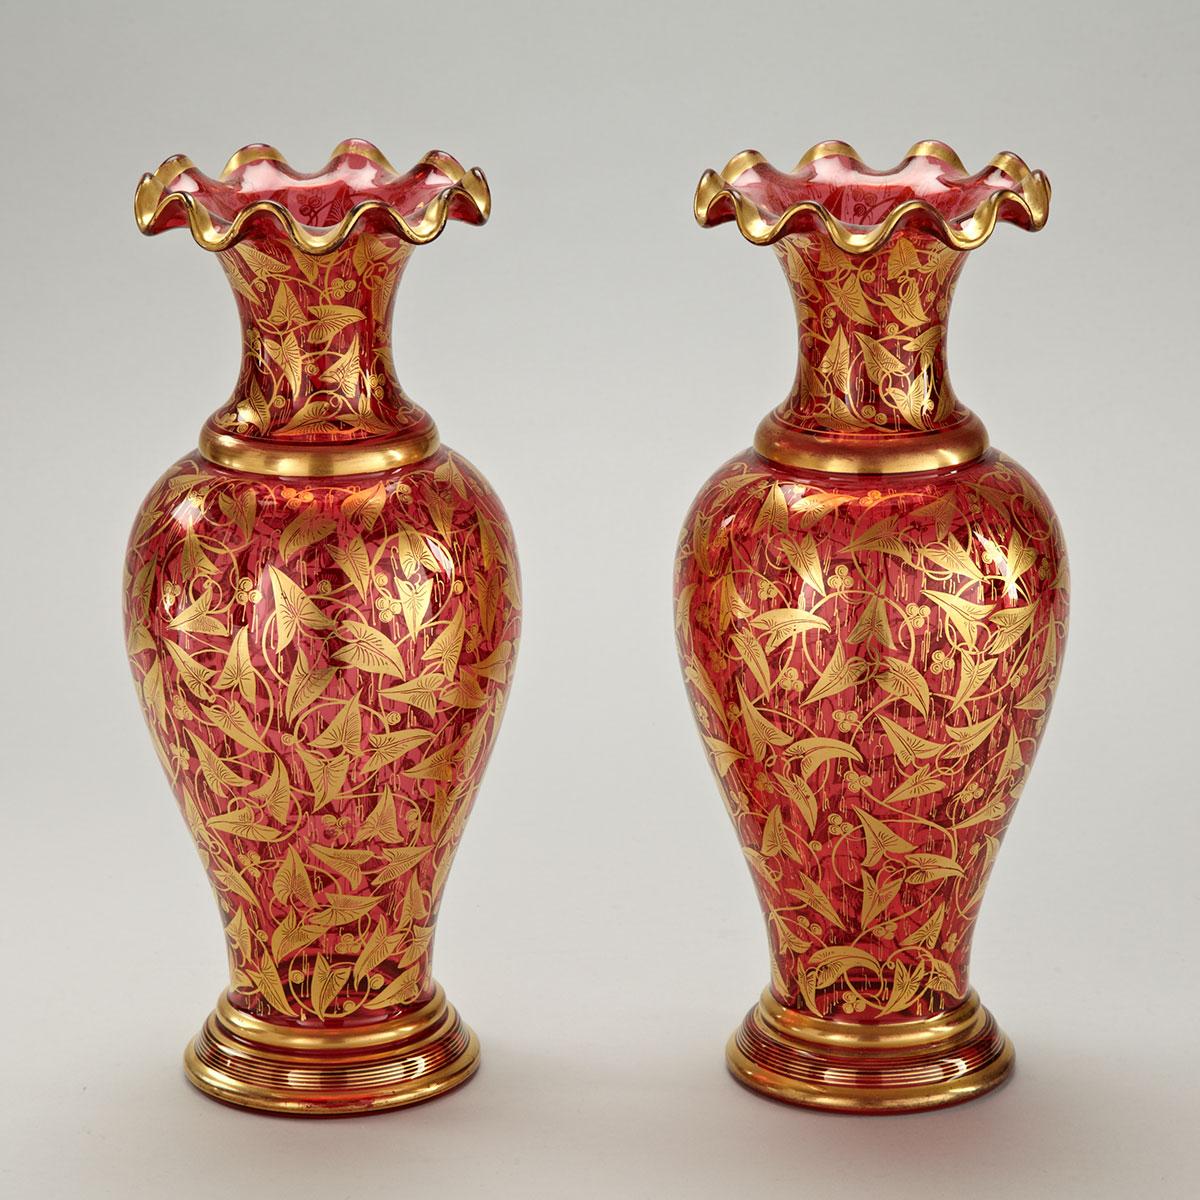 Pair of English Red Glass Vases, c.1860